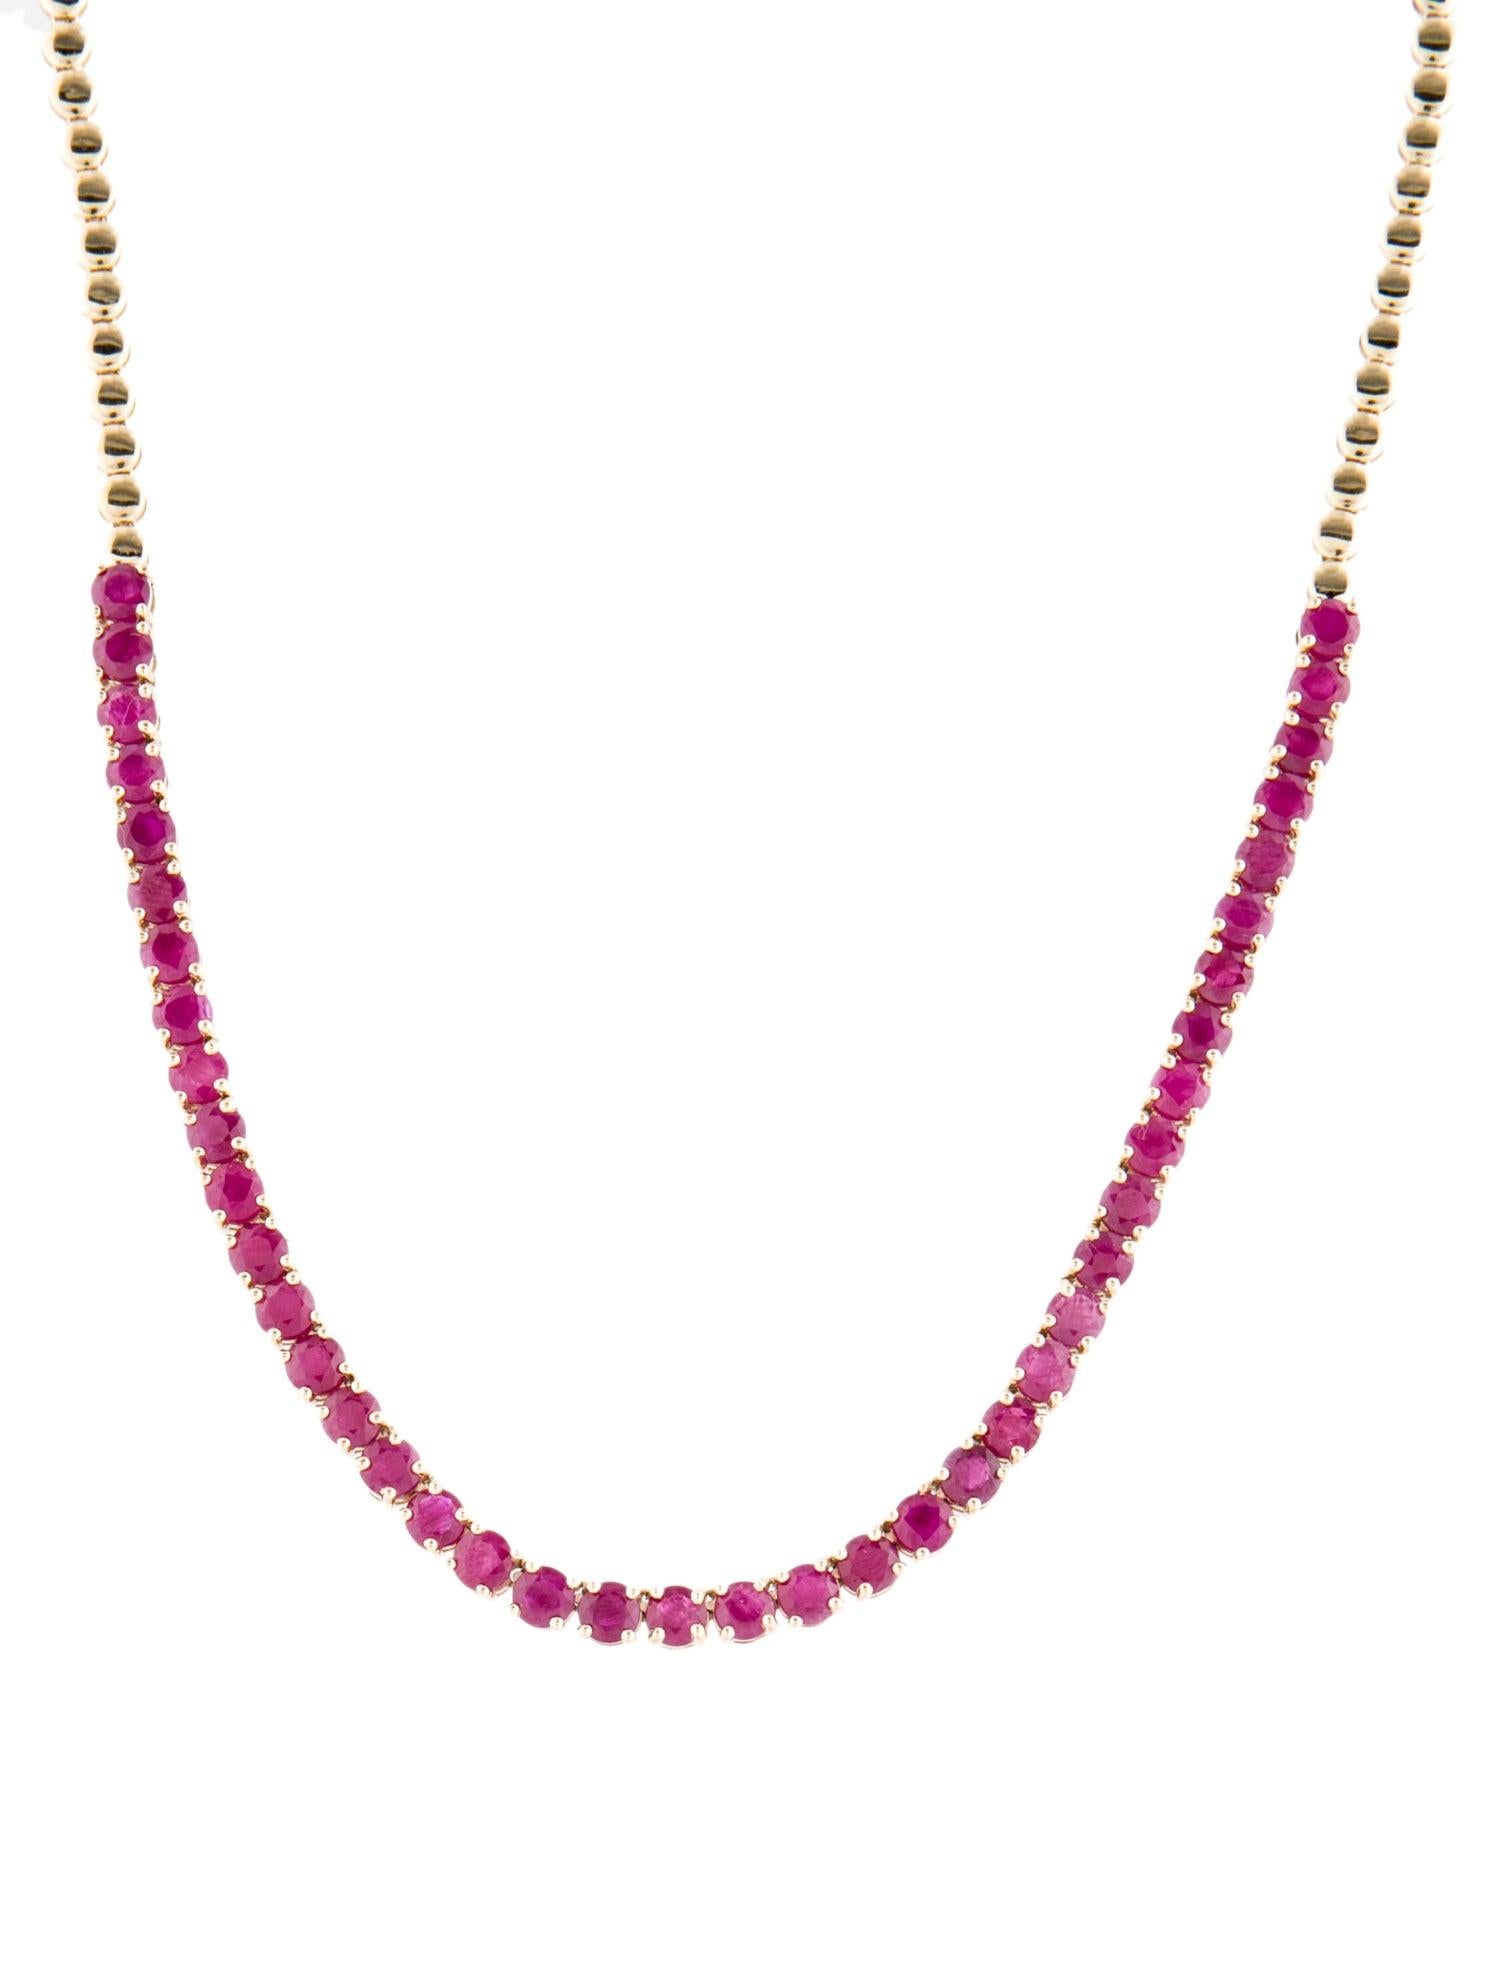 Women's 14K Ruby Chain Necklace 16.40ctw - Exquisite Jewelry for Elegant Sophistication For Sale